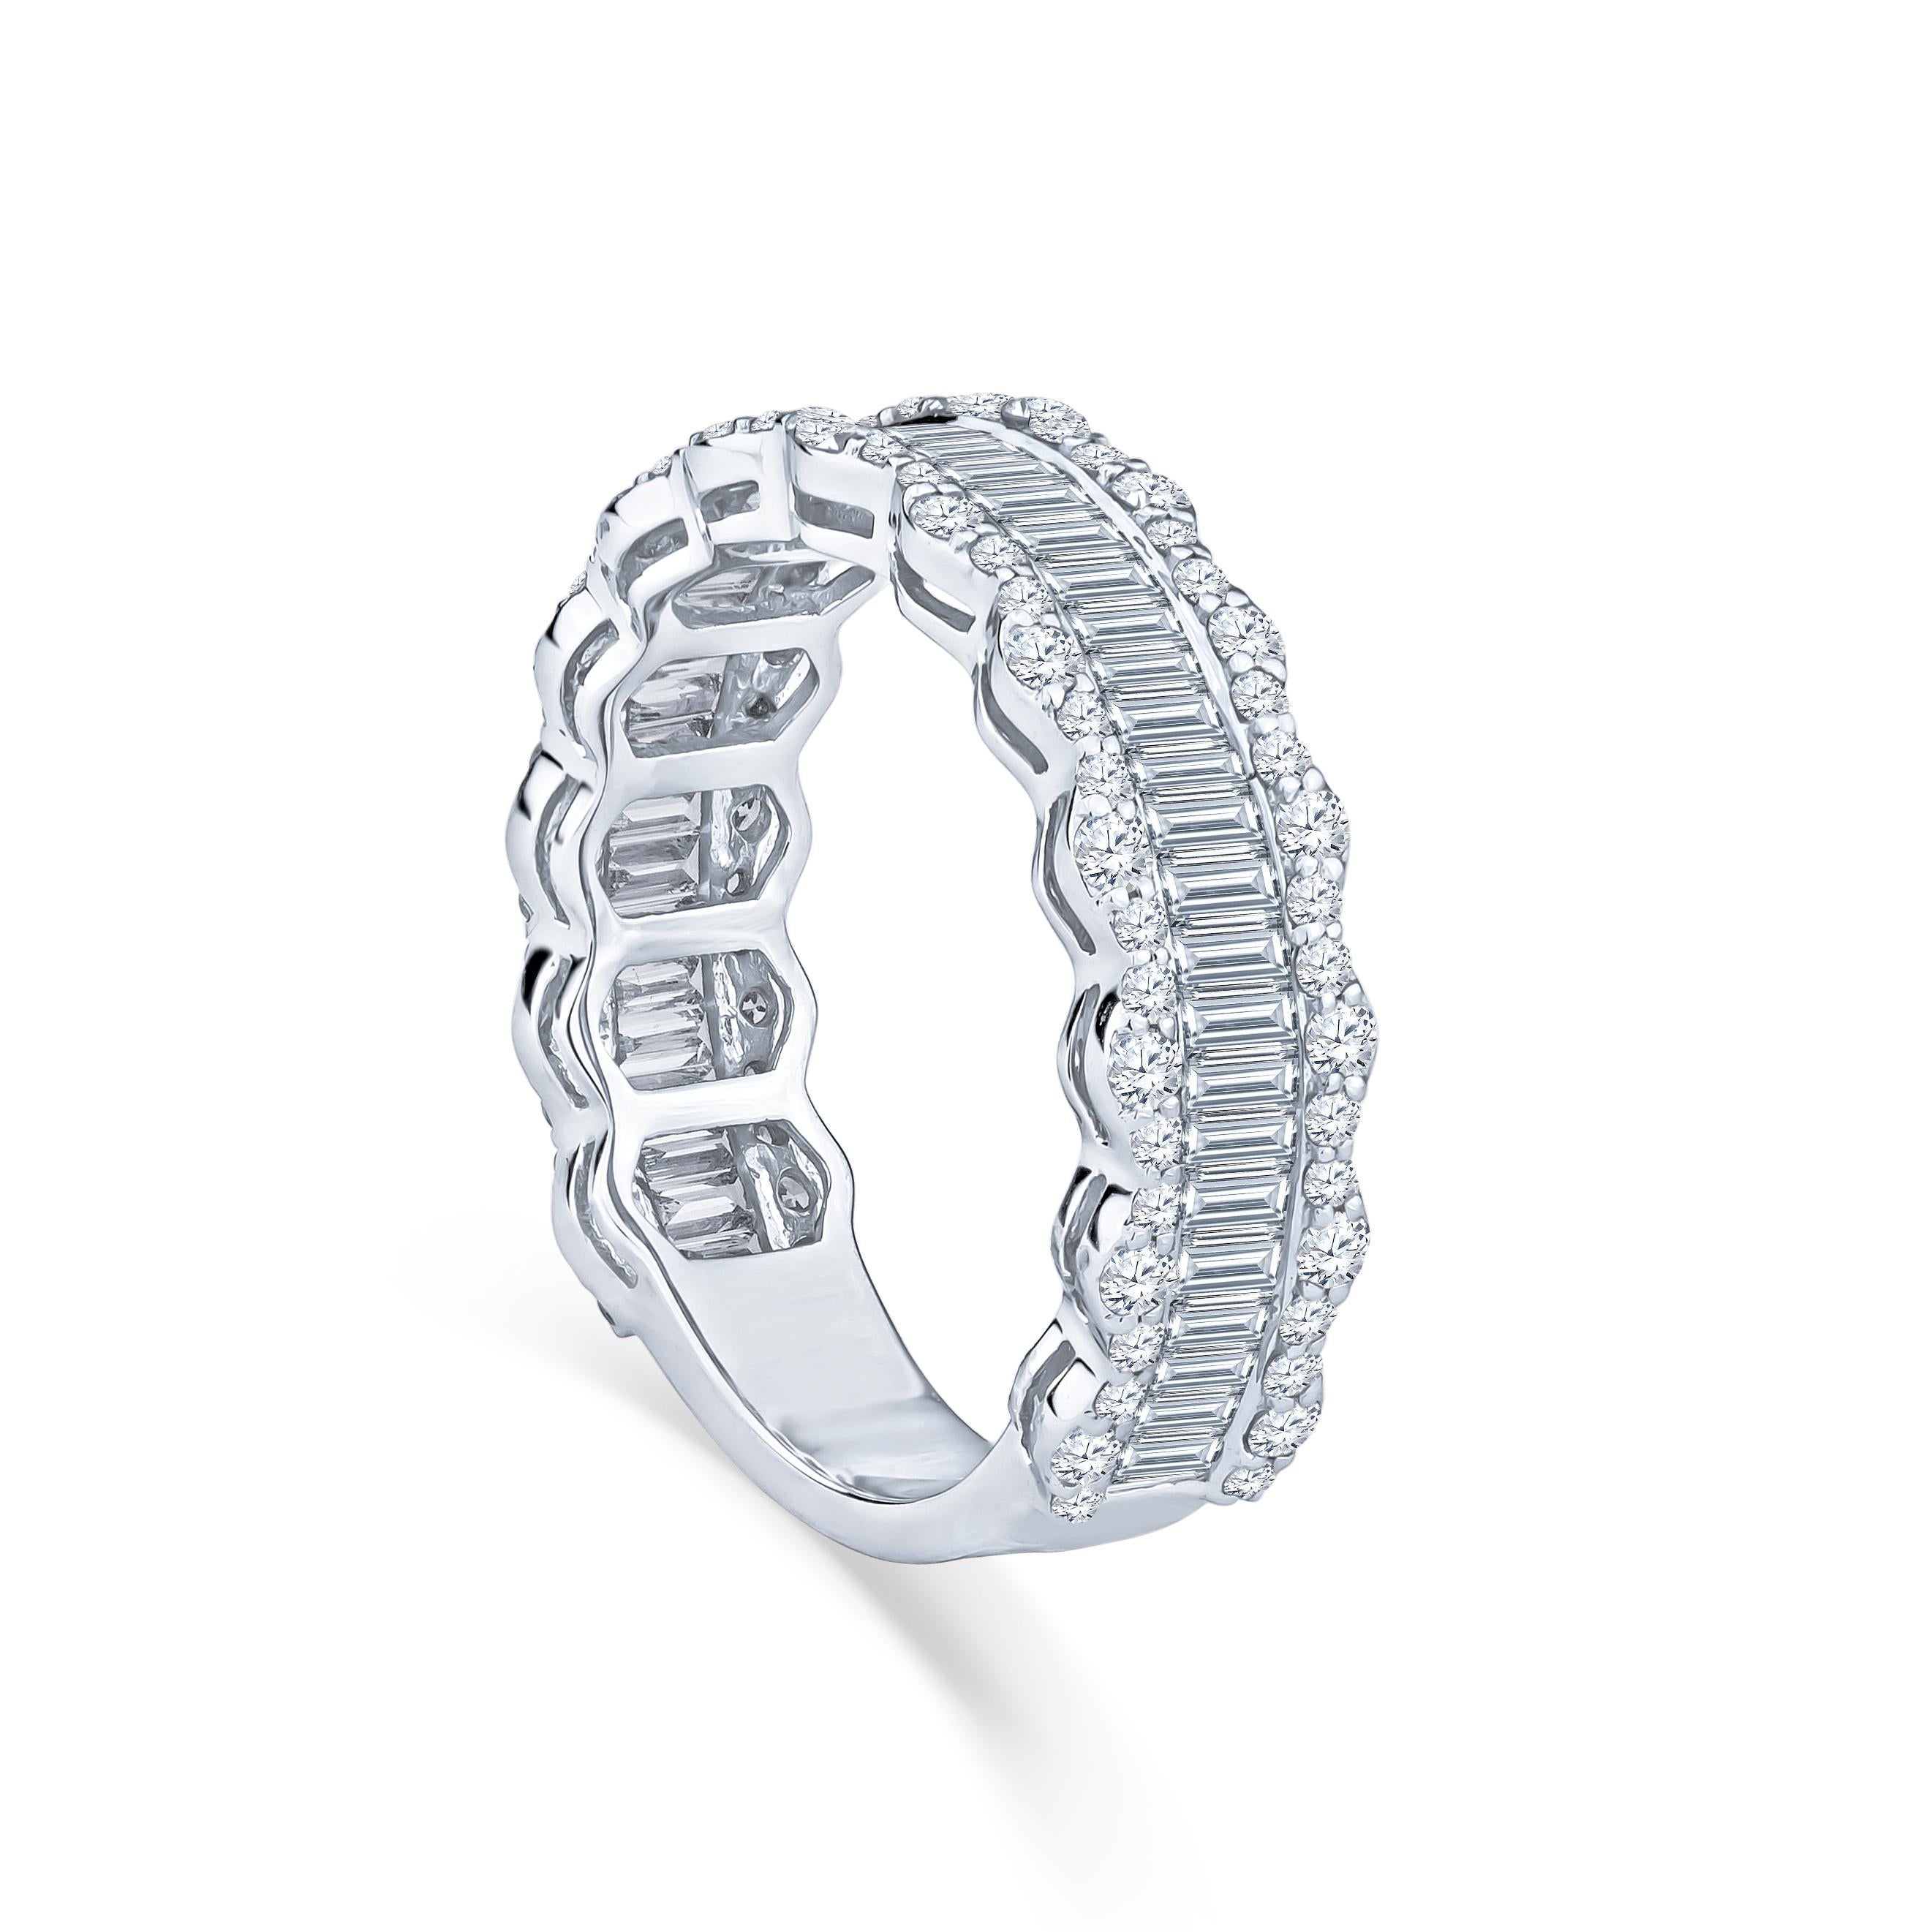 This band has a total weight of 1.34ct in baguette and round diamonds! It is all set in an 18kt white gold ring. The size is a 6.5, but it has some room to be resized.